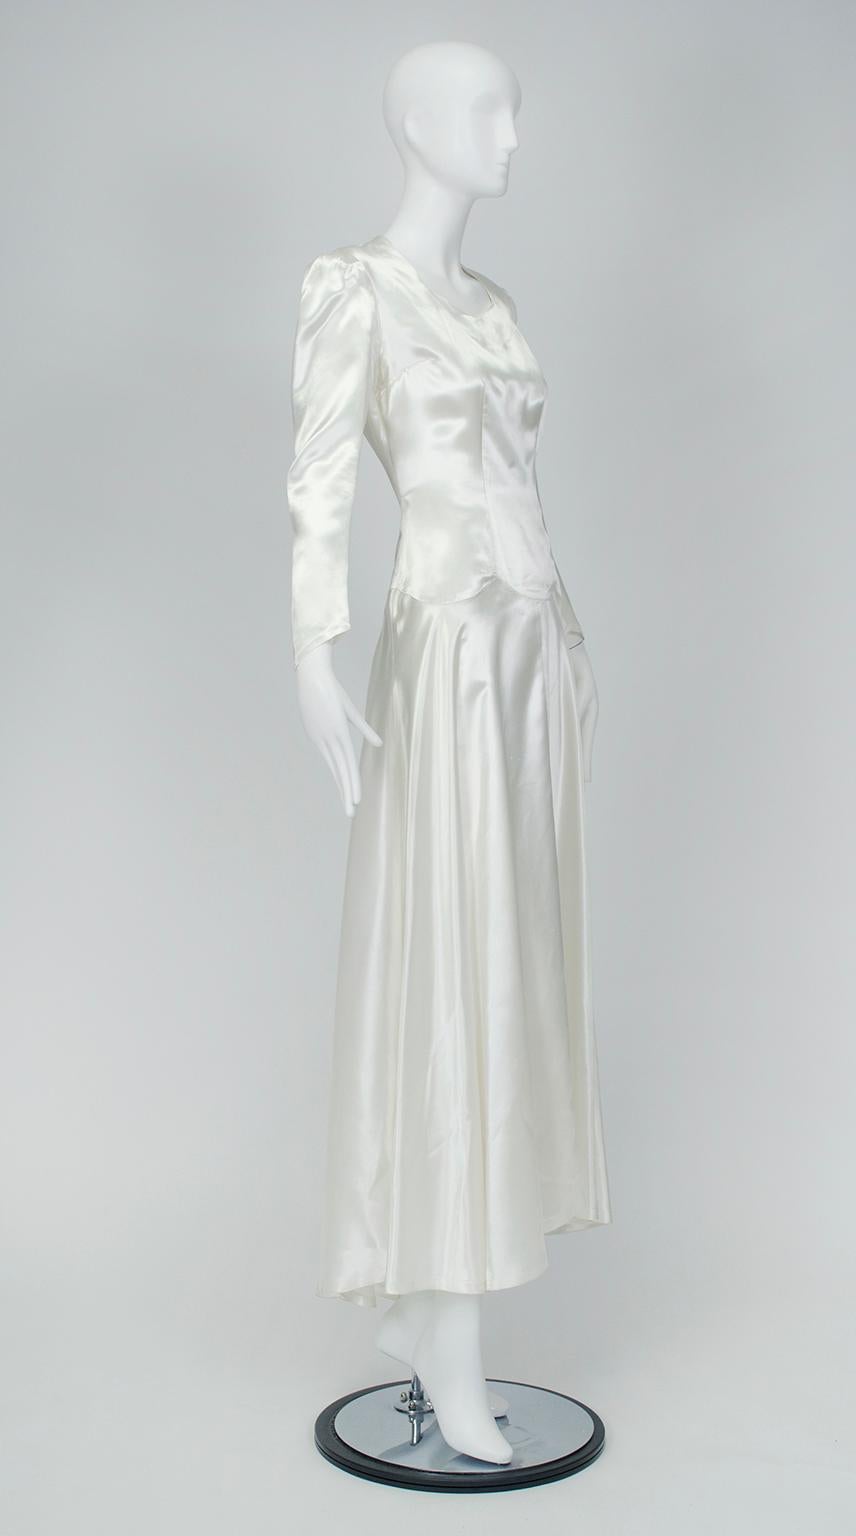 When wartime rationing abbreviated garment lengths, brides used intricate seams and sharp tailoring to create interest in favor of volume. This shimmering example incorporates a scalloped waist seam and military shoulders to create a simple but